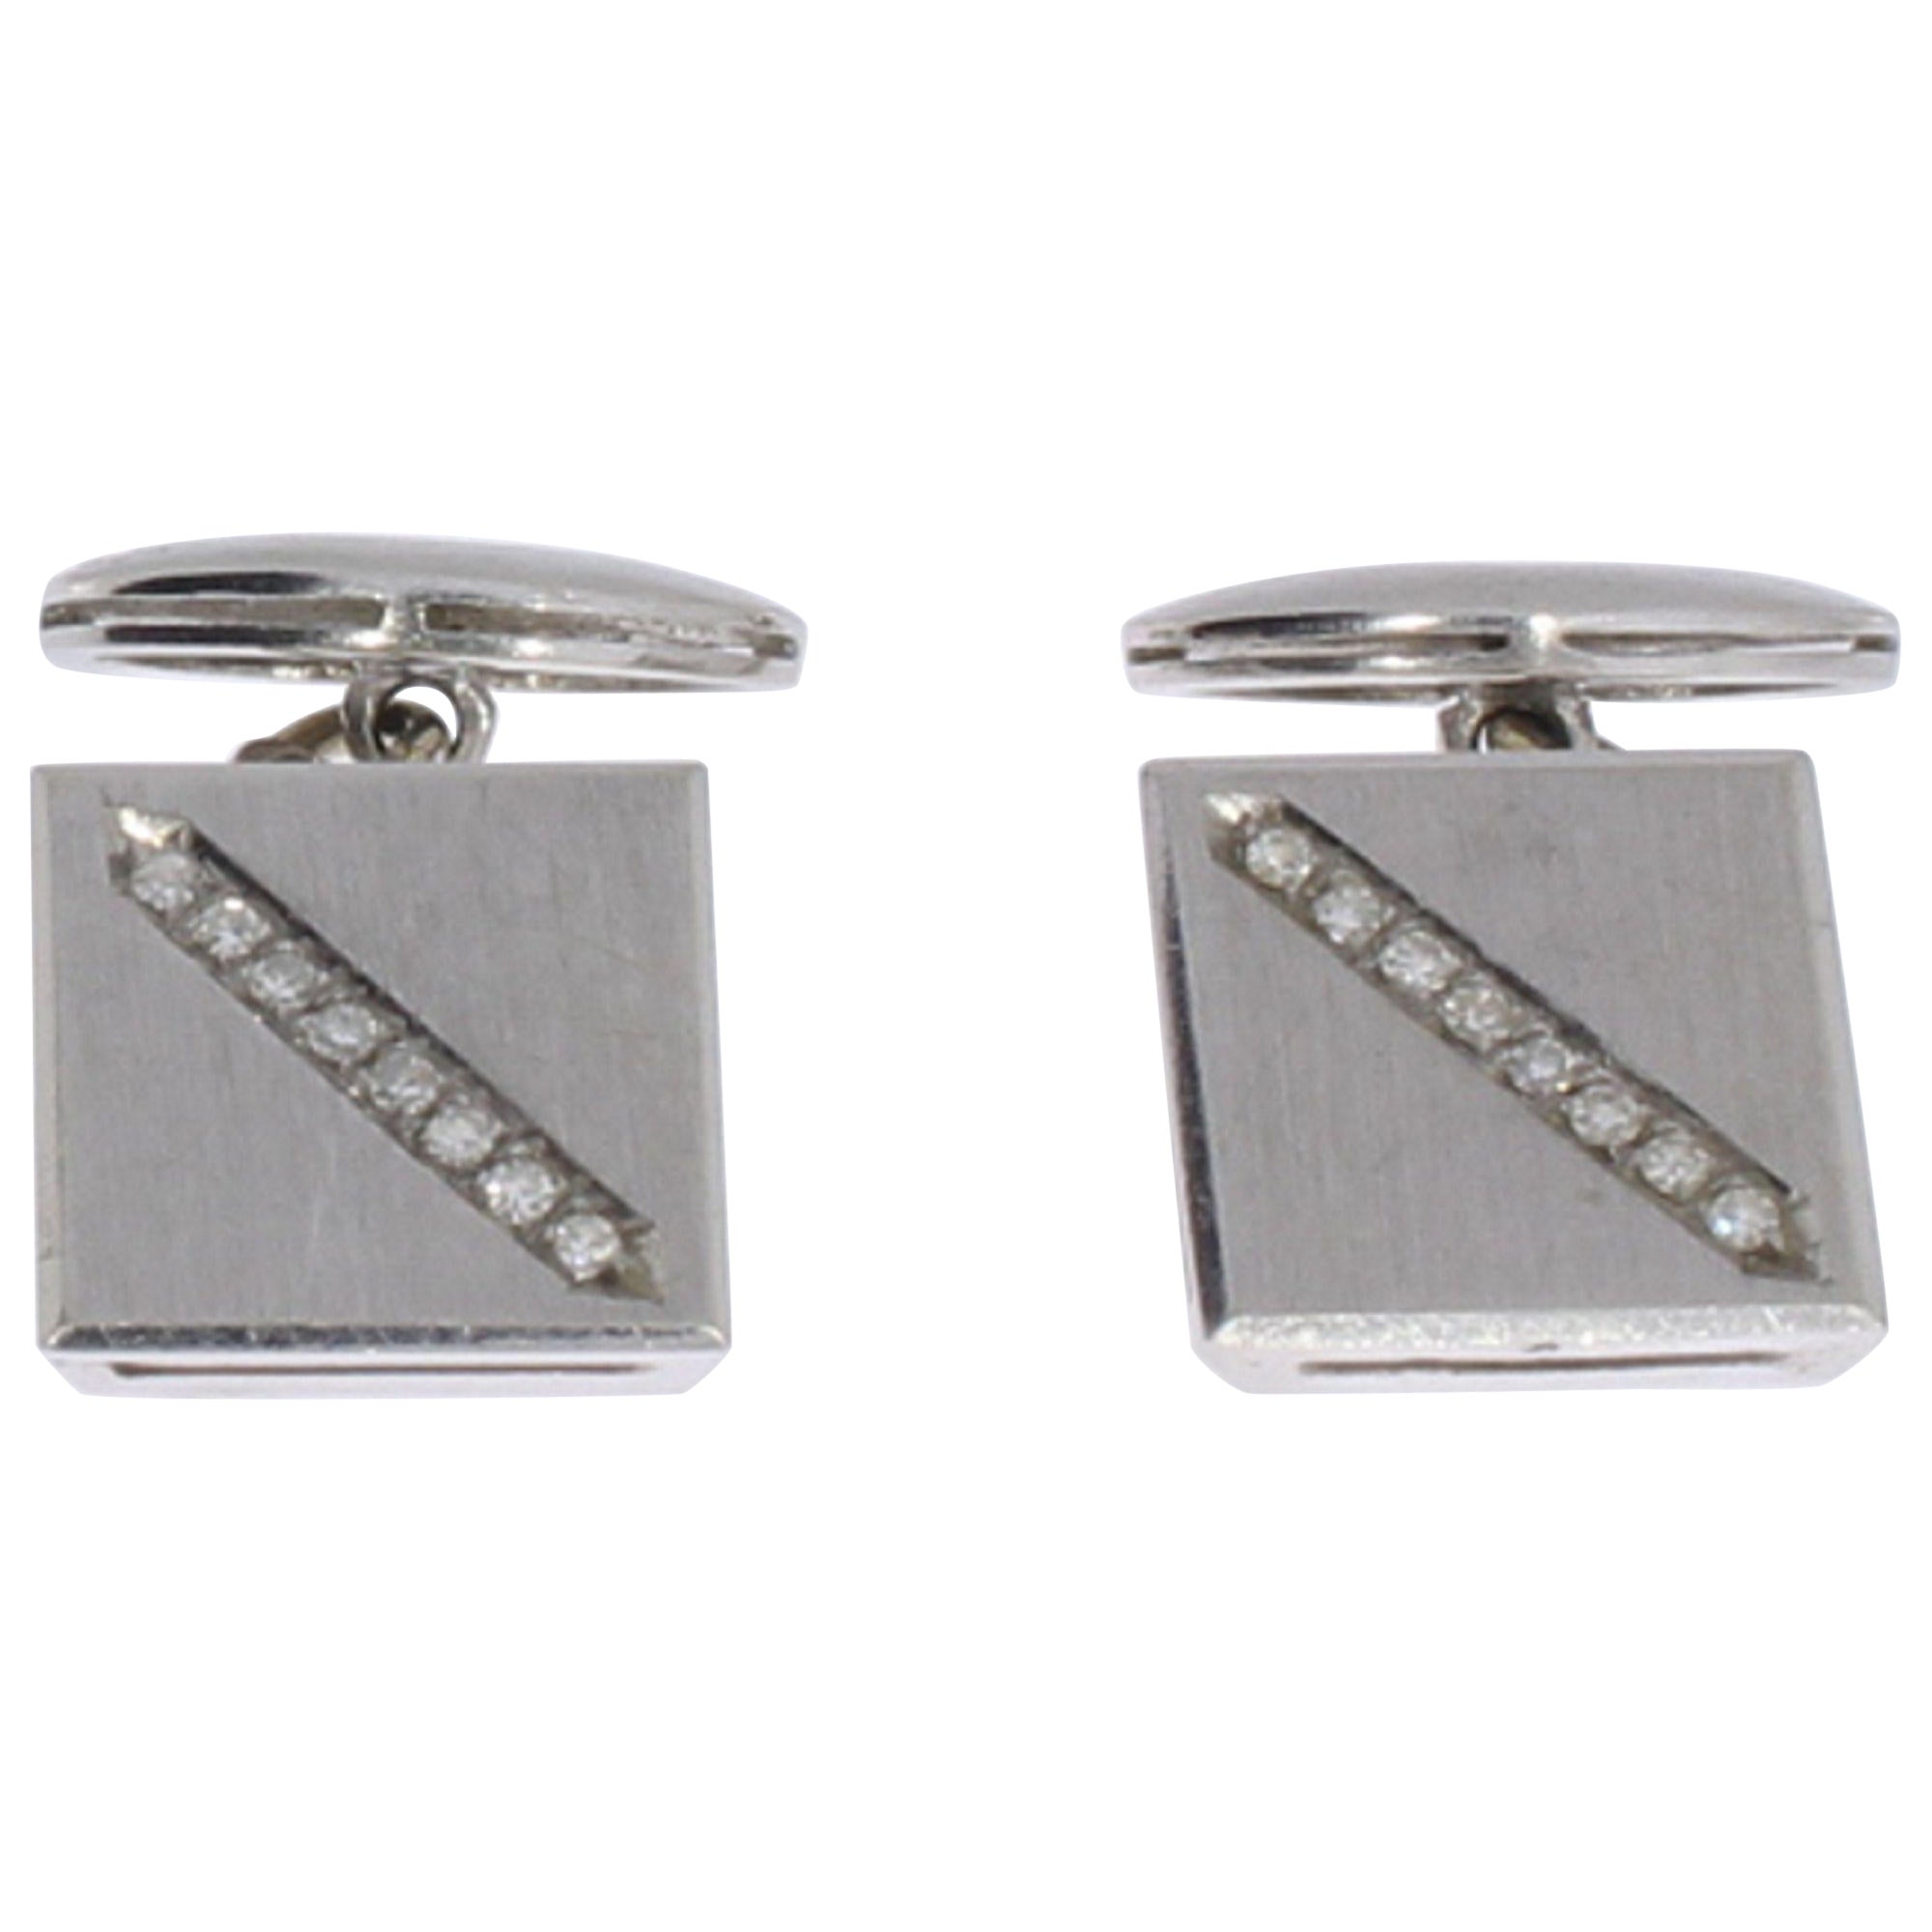 A Pair of White Gold Cufflinks with Diamonds